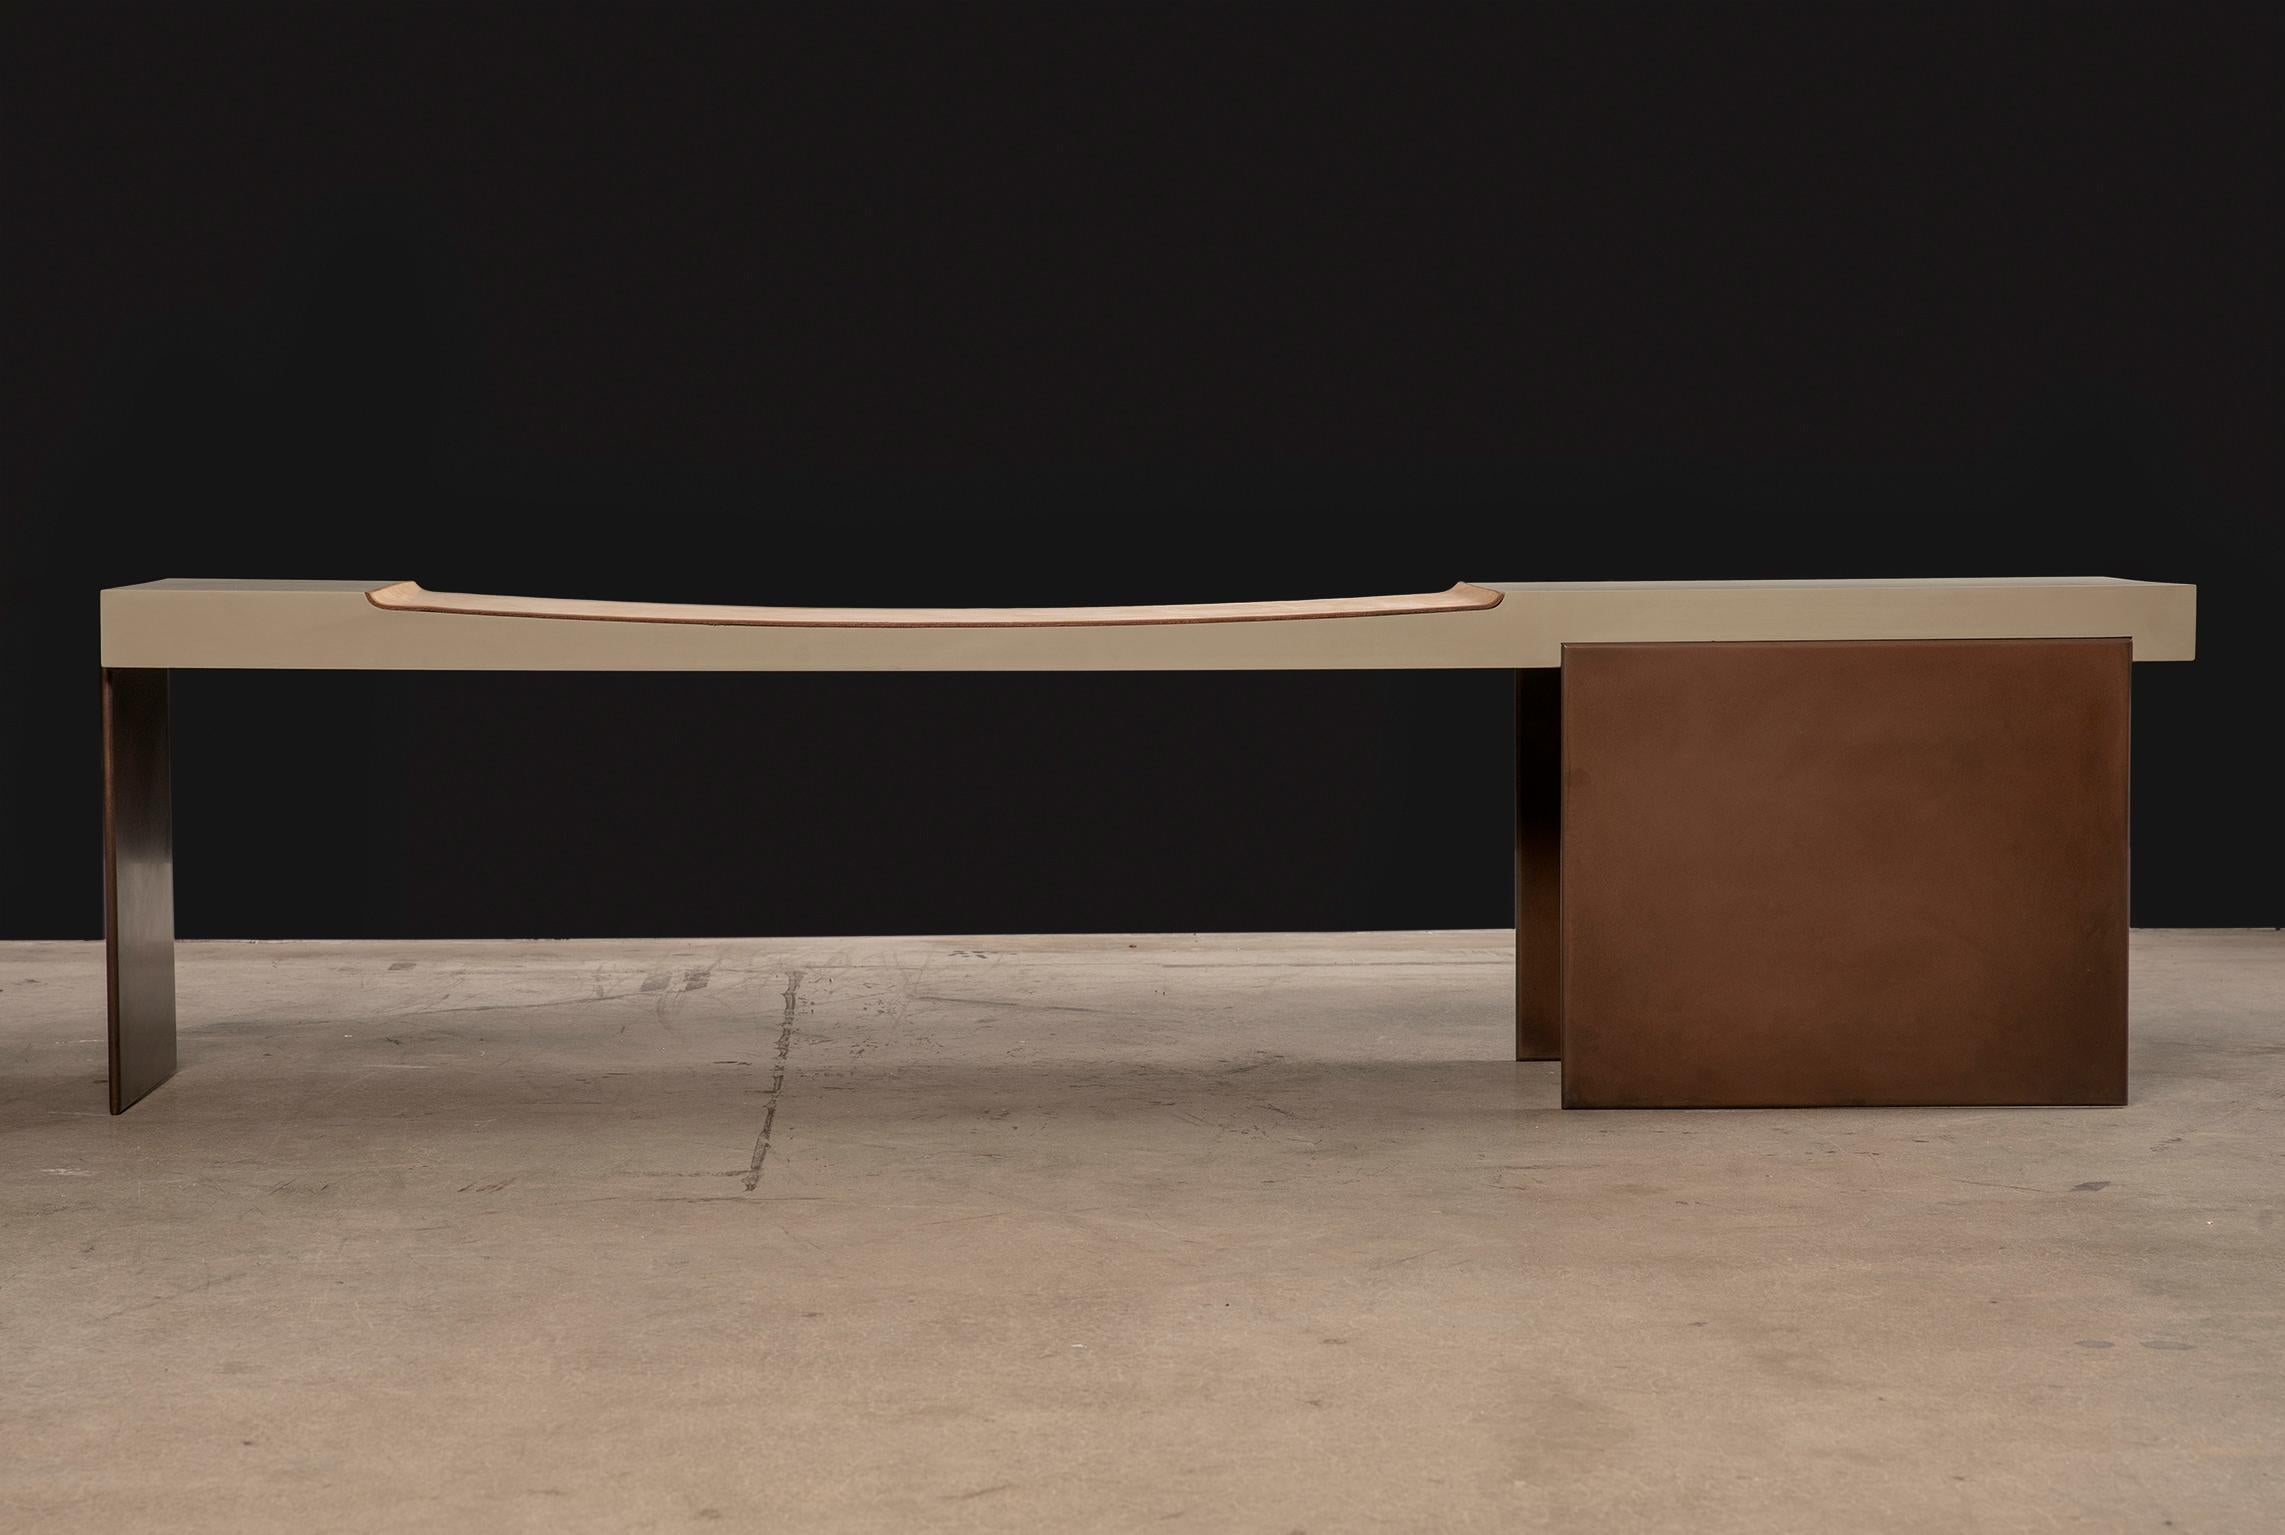 The Museum bench imparts a statement of quiet strength and elegance. Its contemporary Minimalist design is balanced with substantial materials, tones and textures. The solid wood body is coated in a matte celadon finish and has a carved seating